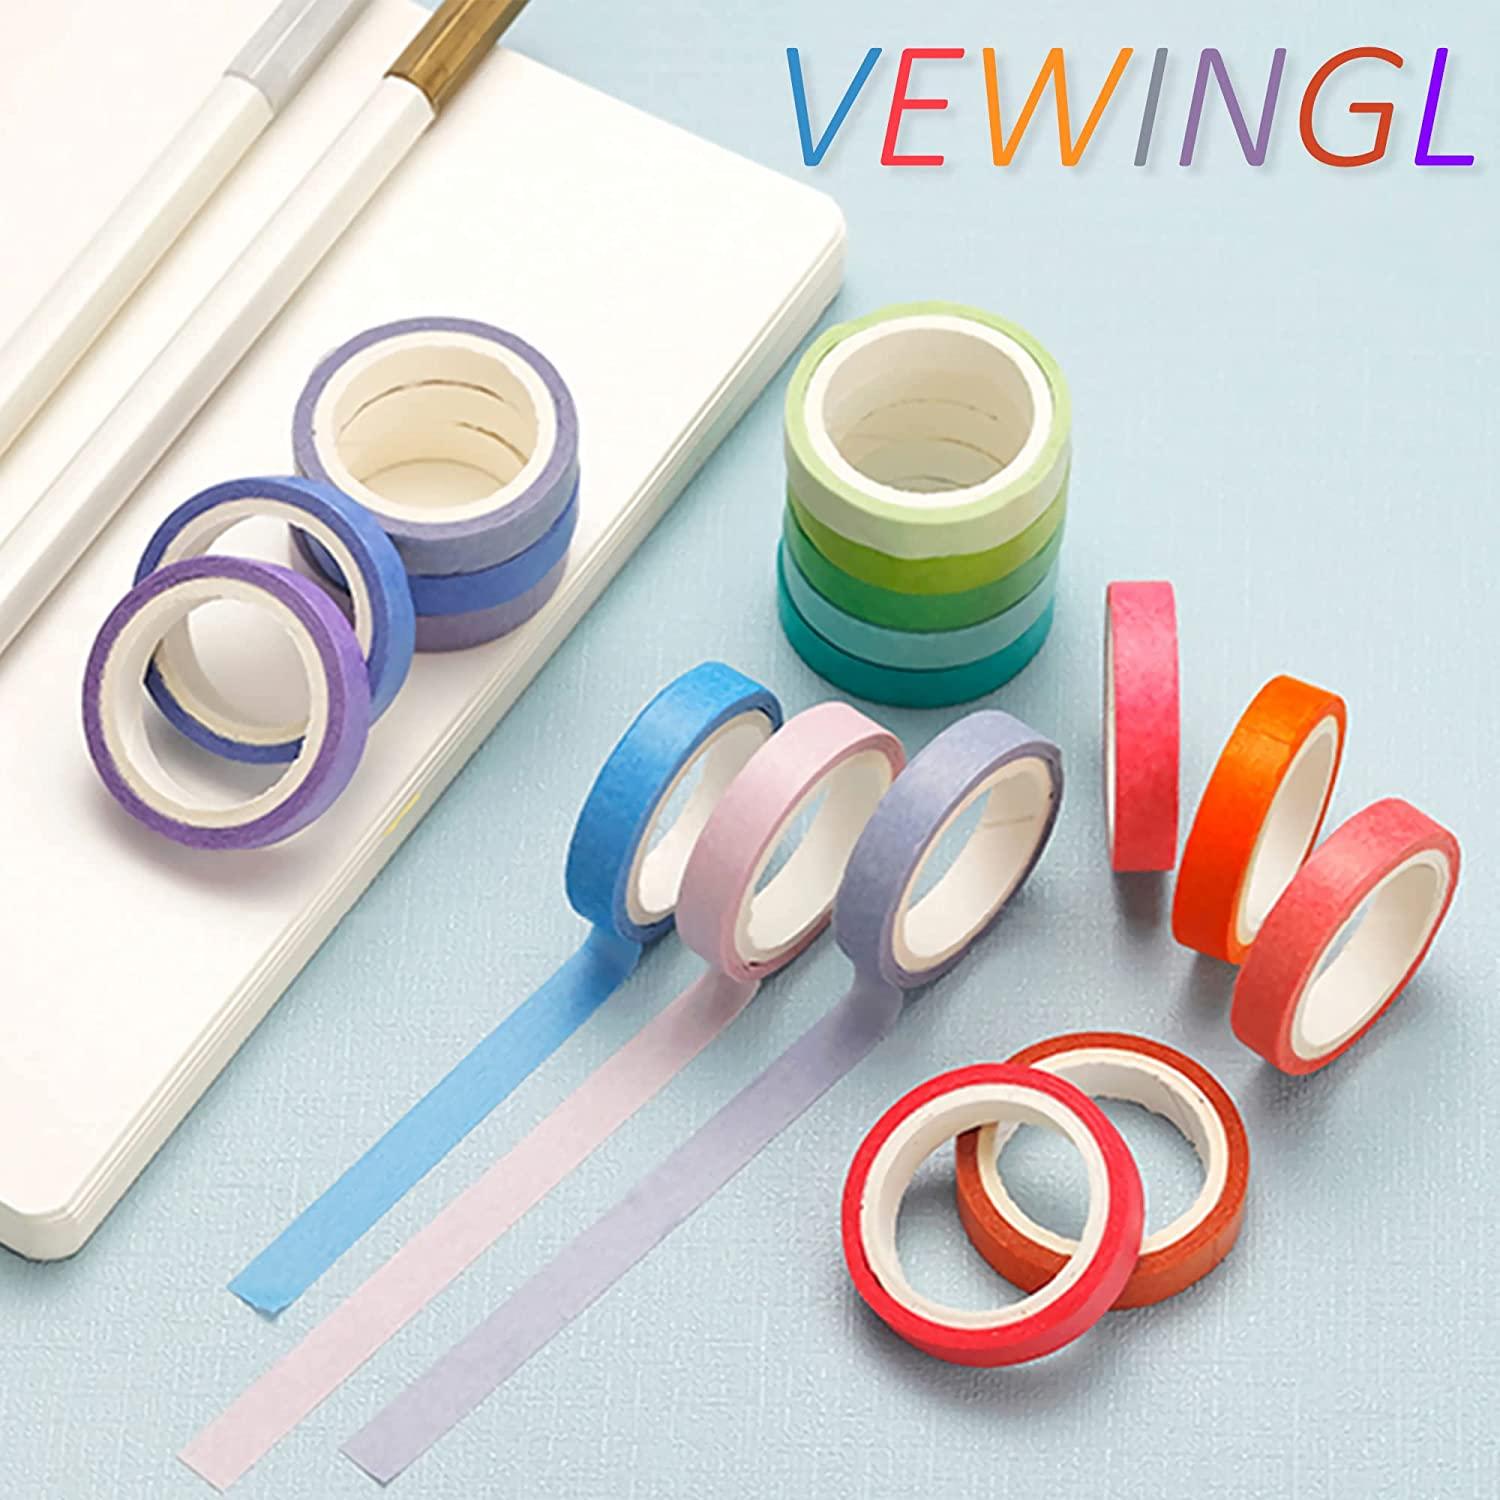 COOLL 8 Rolls Washi Tape Charming DIY Decorative School Supplies Stamping Tape  for Scrapbooking 